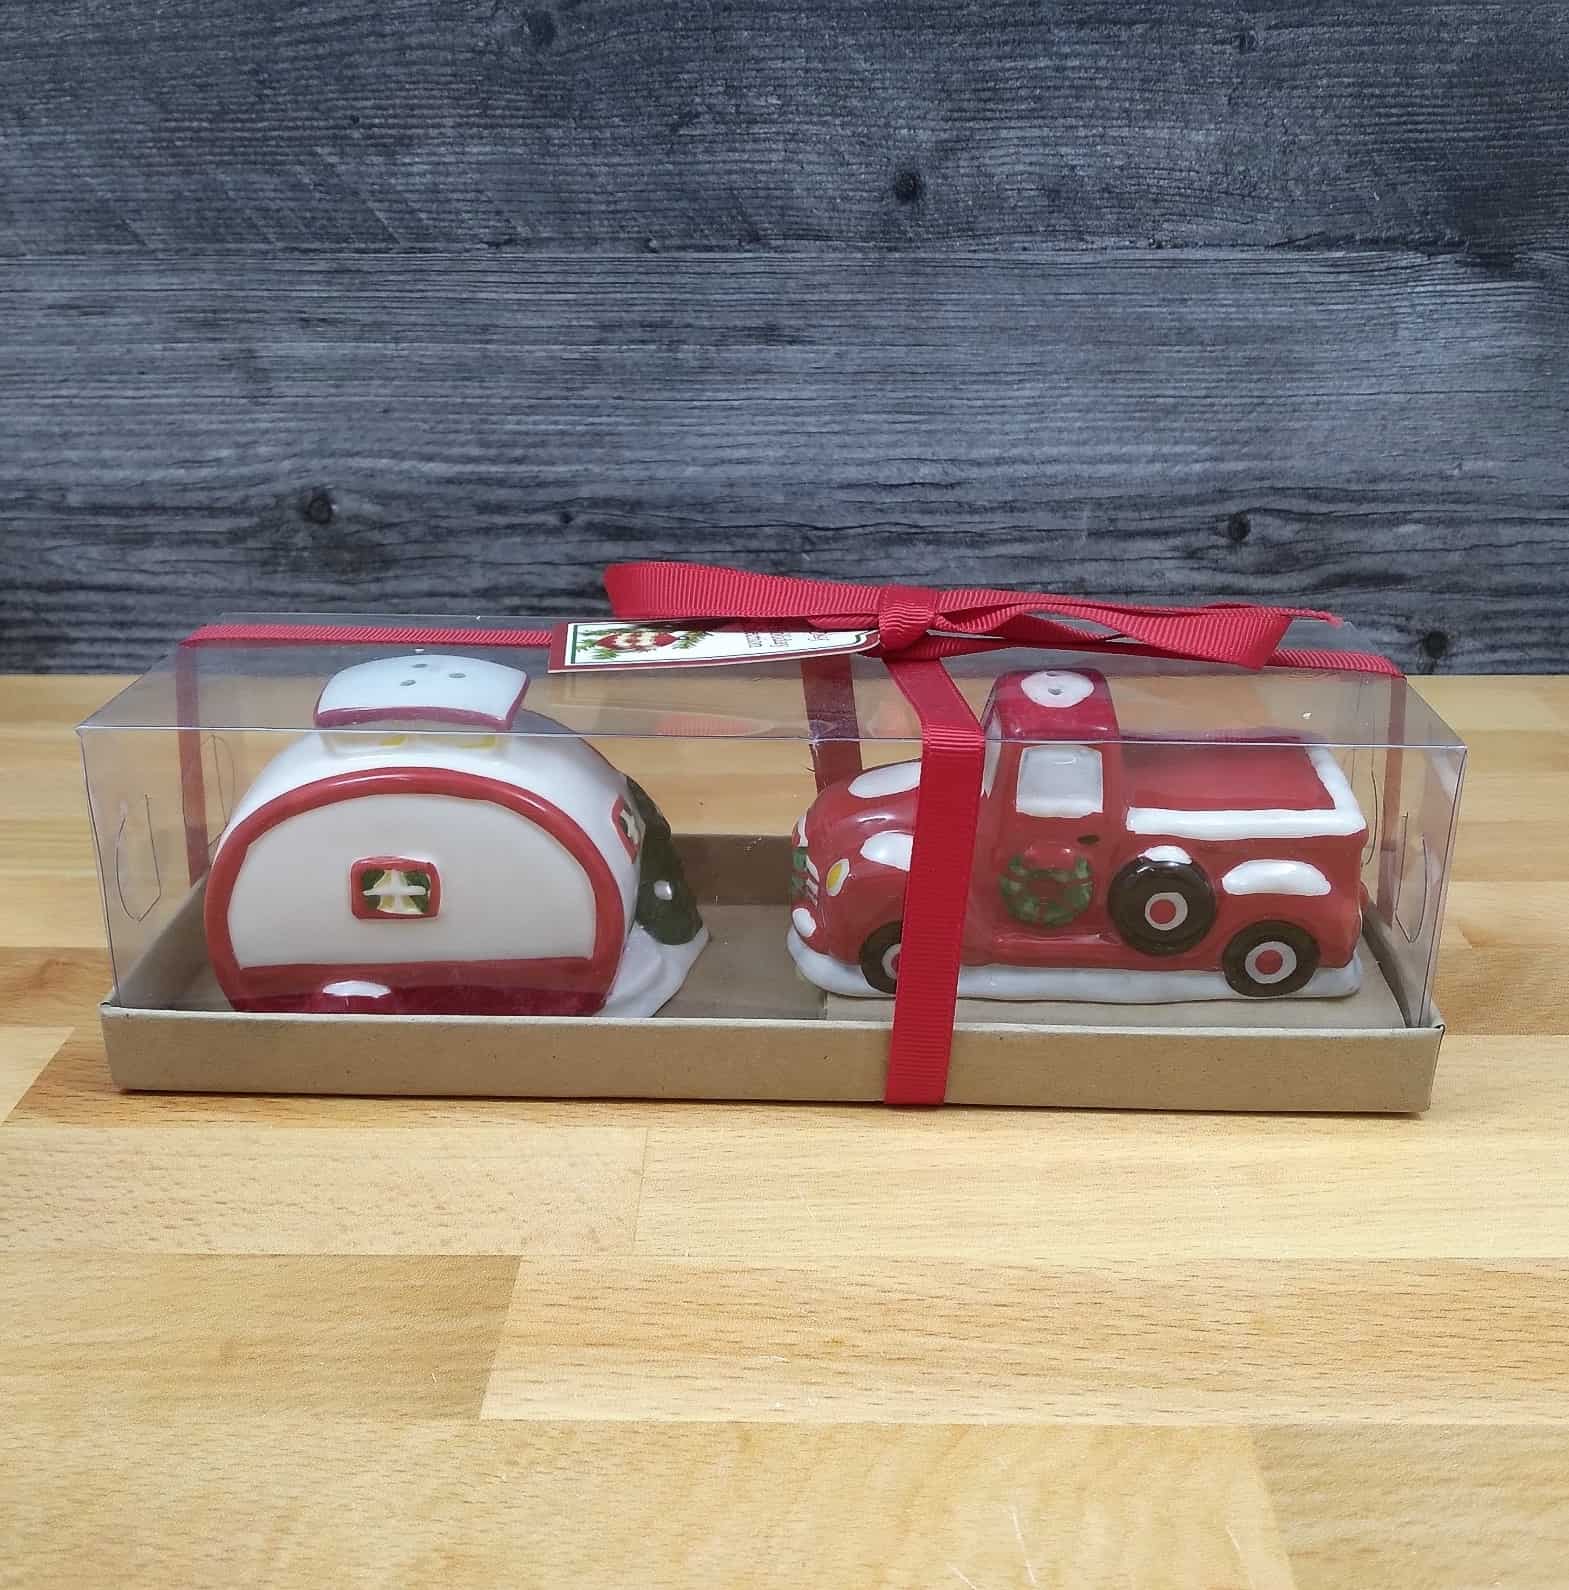 This Retro Camper Holiday Design Salt Pepper Set Collectible by Blue Sky Clayworks is made with love by Premier Homegoods! Shop more unique gift ideas today with Spots Initiatives, the best way to support creators.